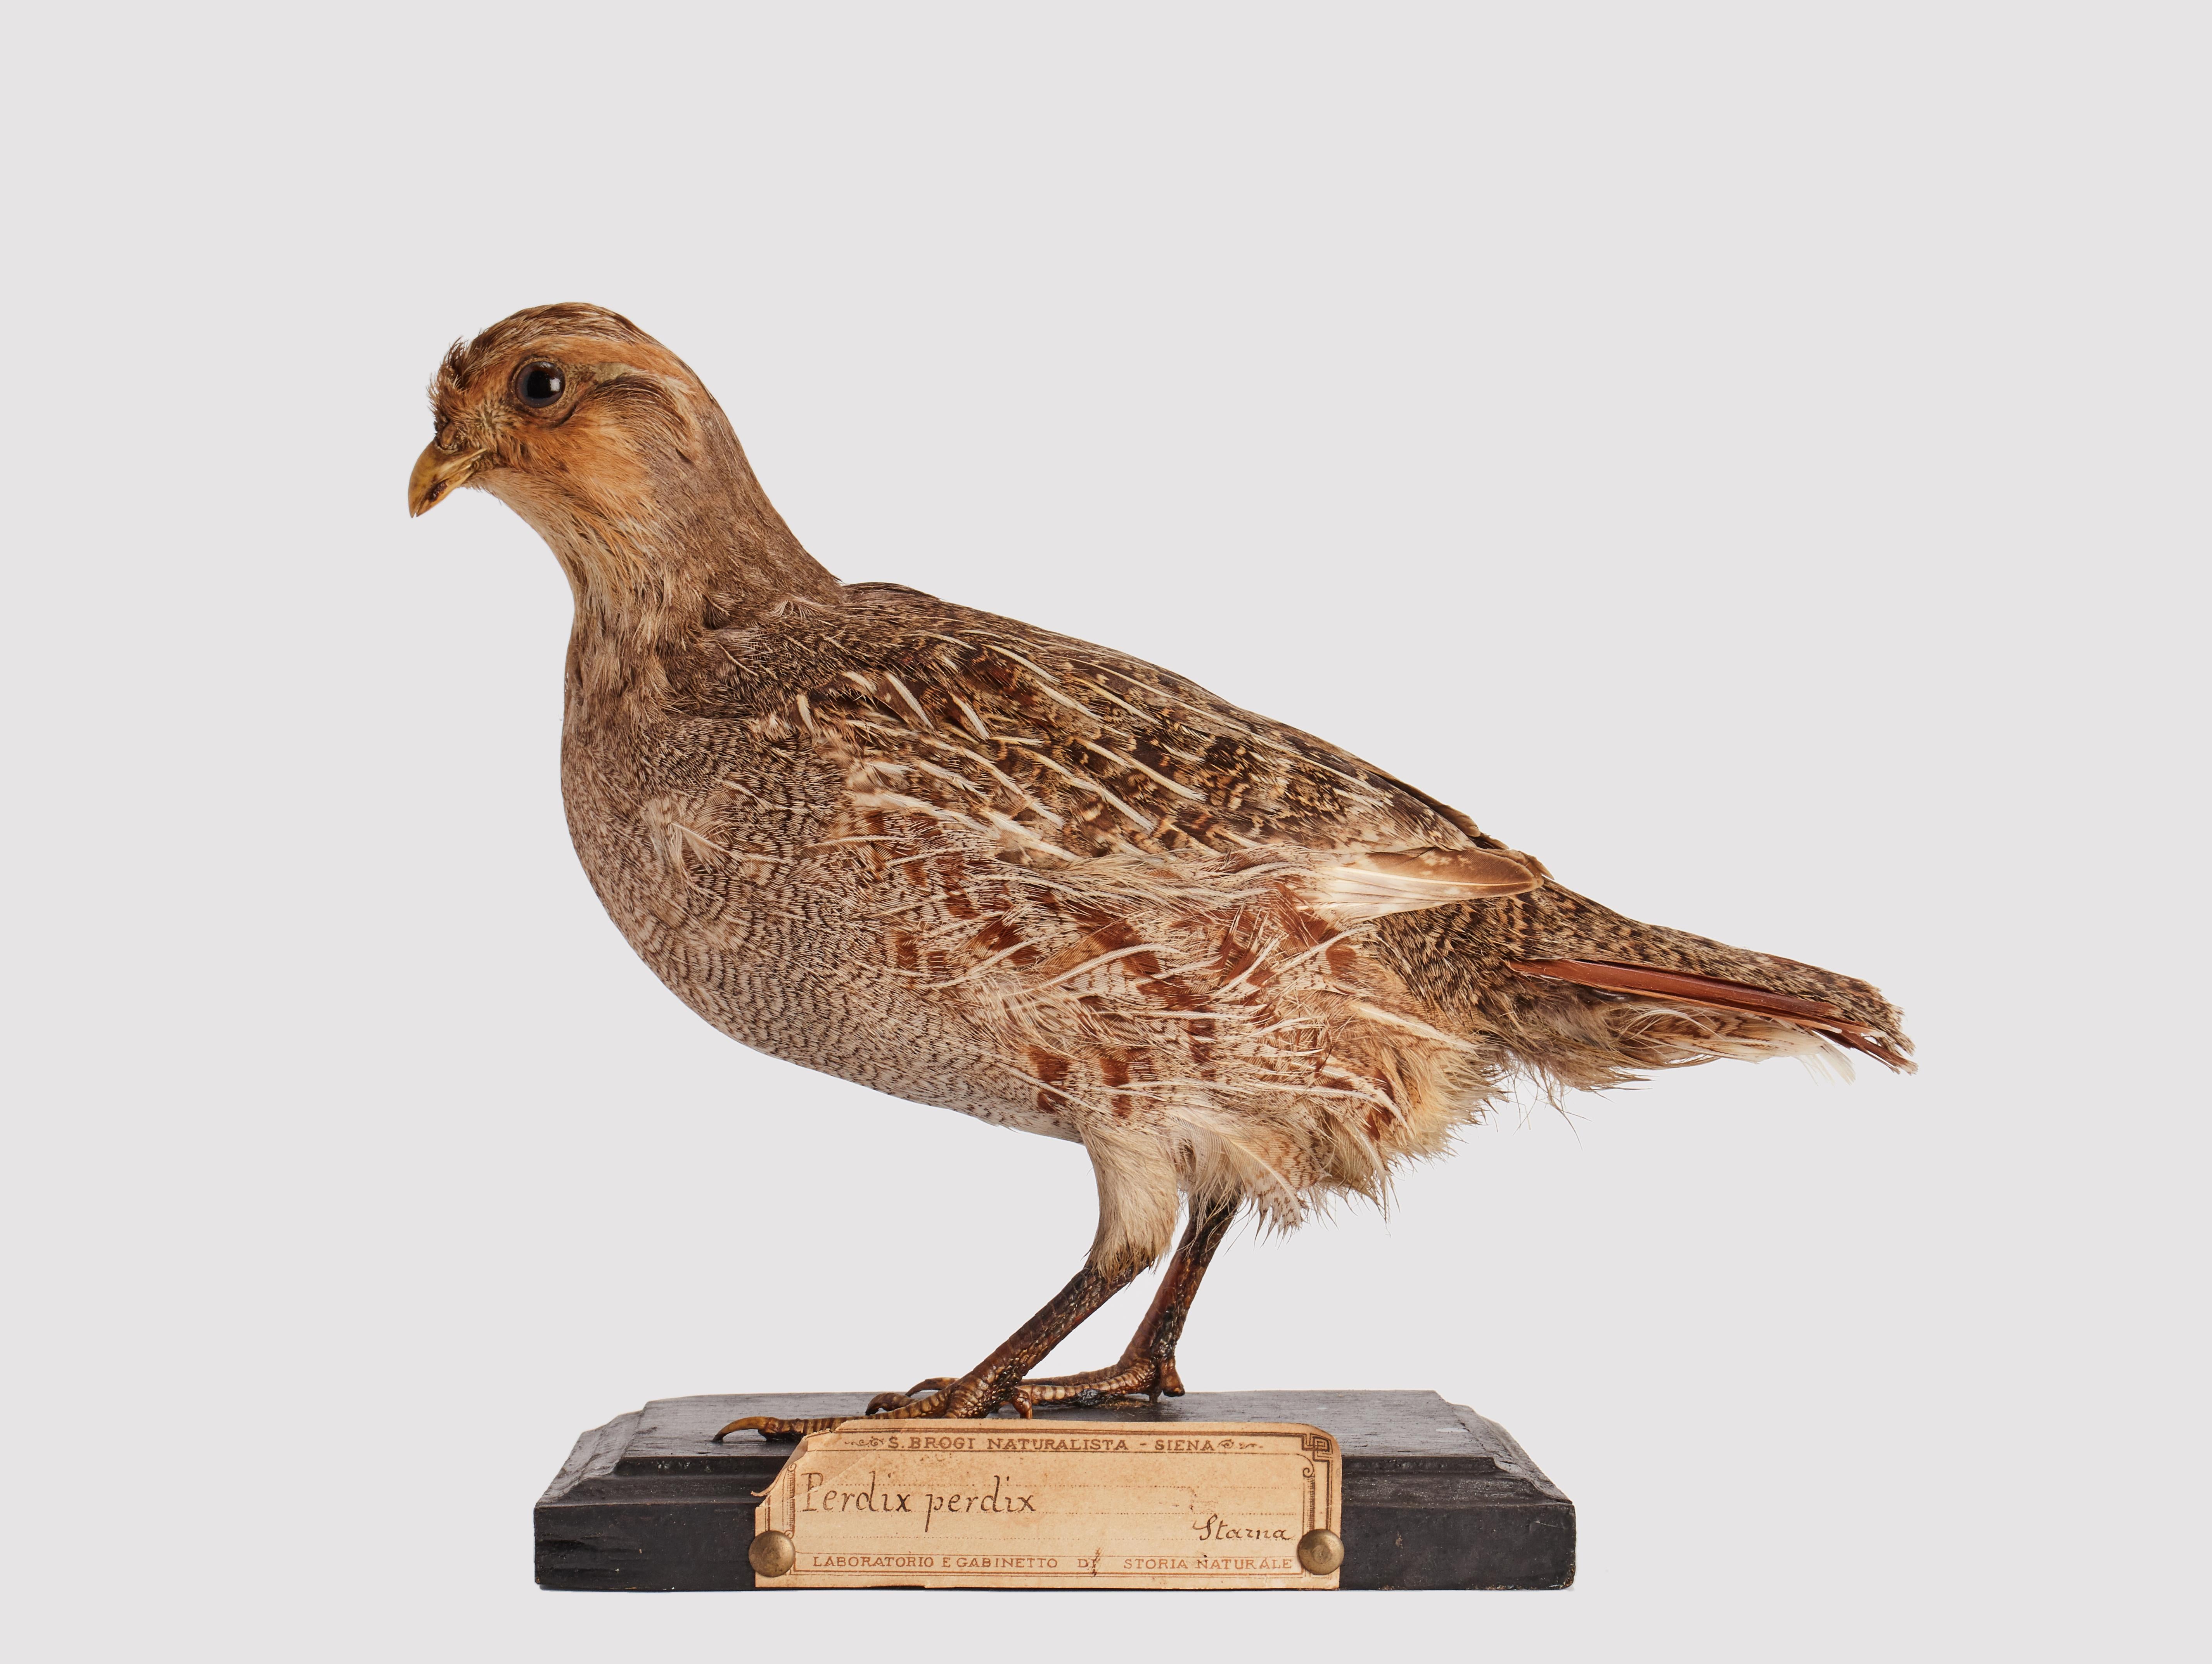 Natural specimen from Wunderkammer Stuffed bird (Perdix perdix)  Partridge mounted on a wooden base with cartouche Specimen for laboratory and Natural history cabinet. S. Brogi Naturalista. Siena, Italy circa 1880.